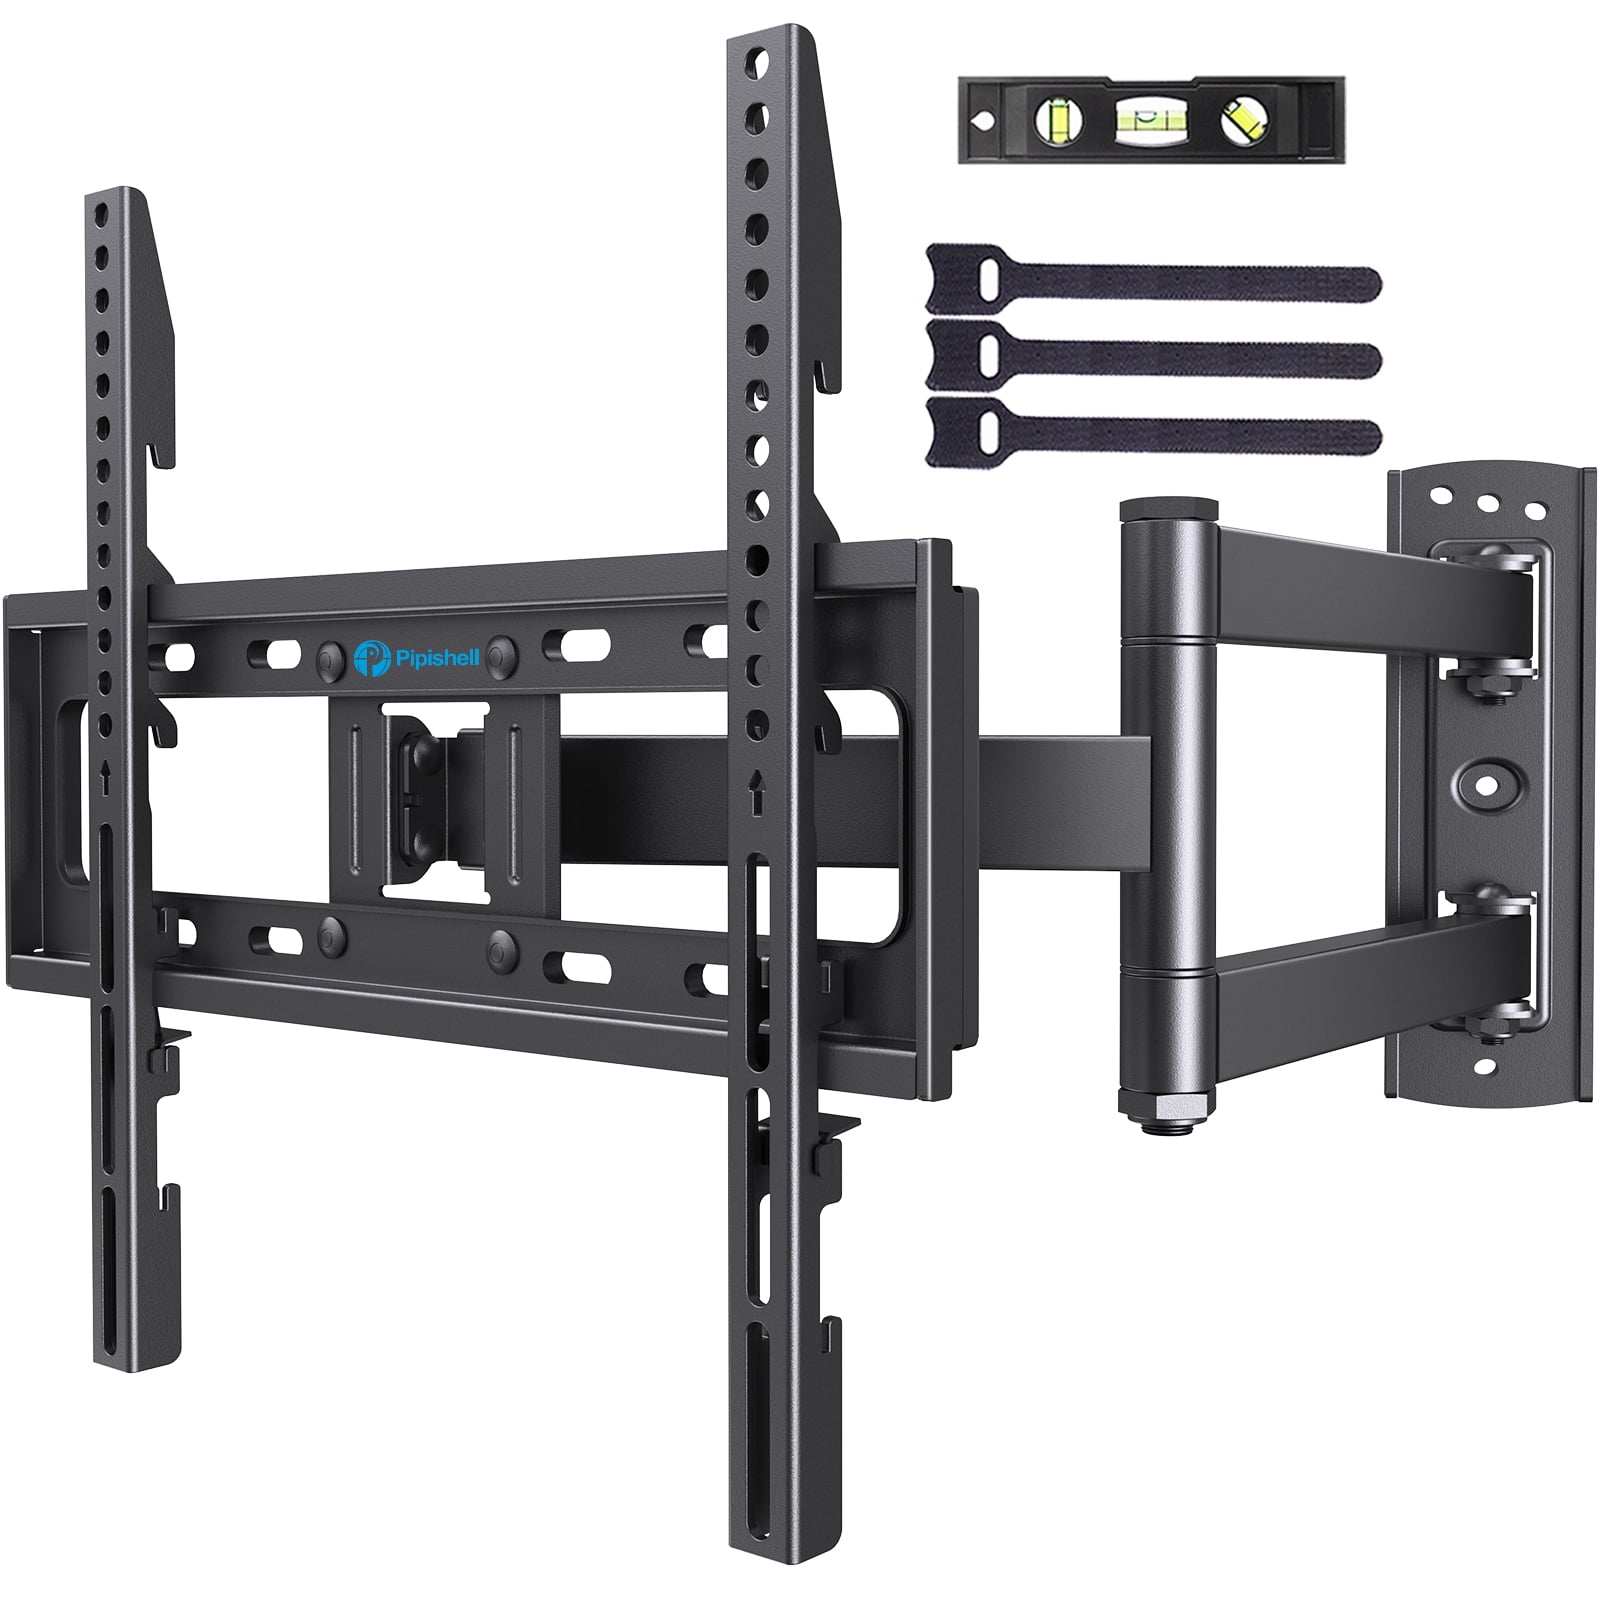 Max VESA 600X400 EVERVIEW TV Wall Mount Bracket fits to most 37-70 inch LED,LCD,OLED Flat Panel TVs 132lbs Loading bring perfect viewing angle Tilt Full motion Swivel Dual Articulating Arms 